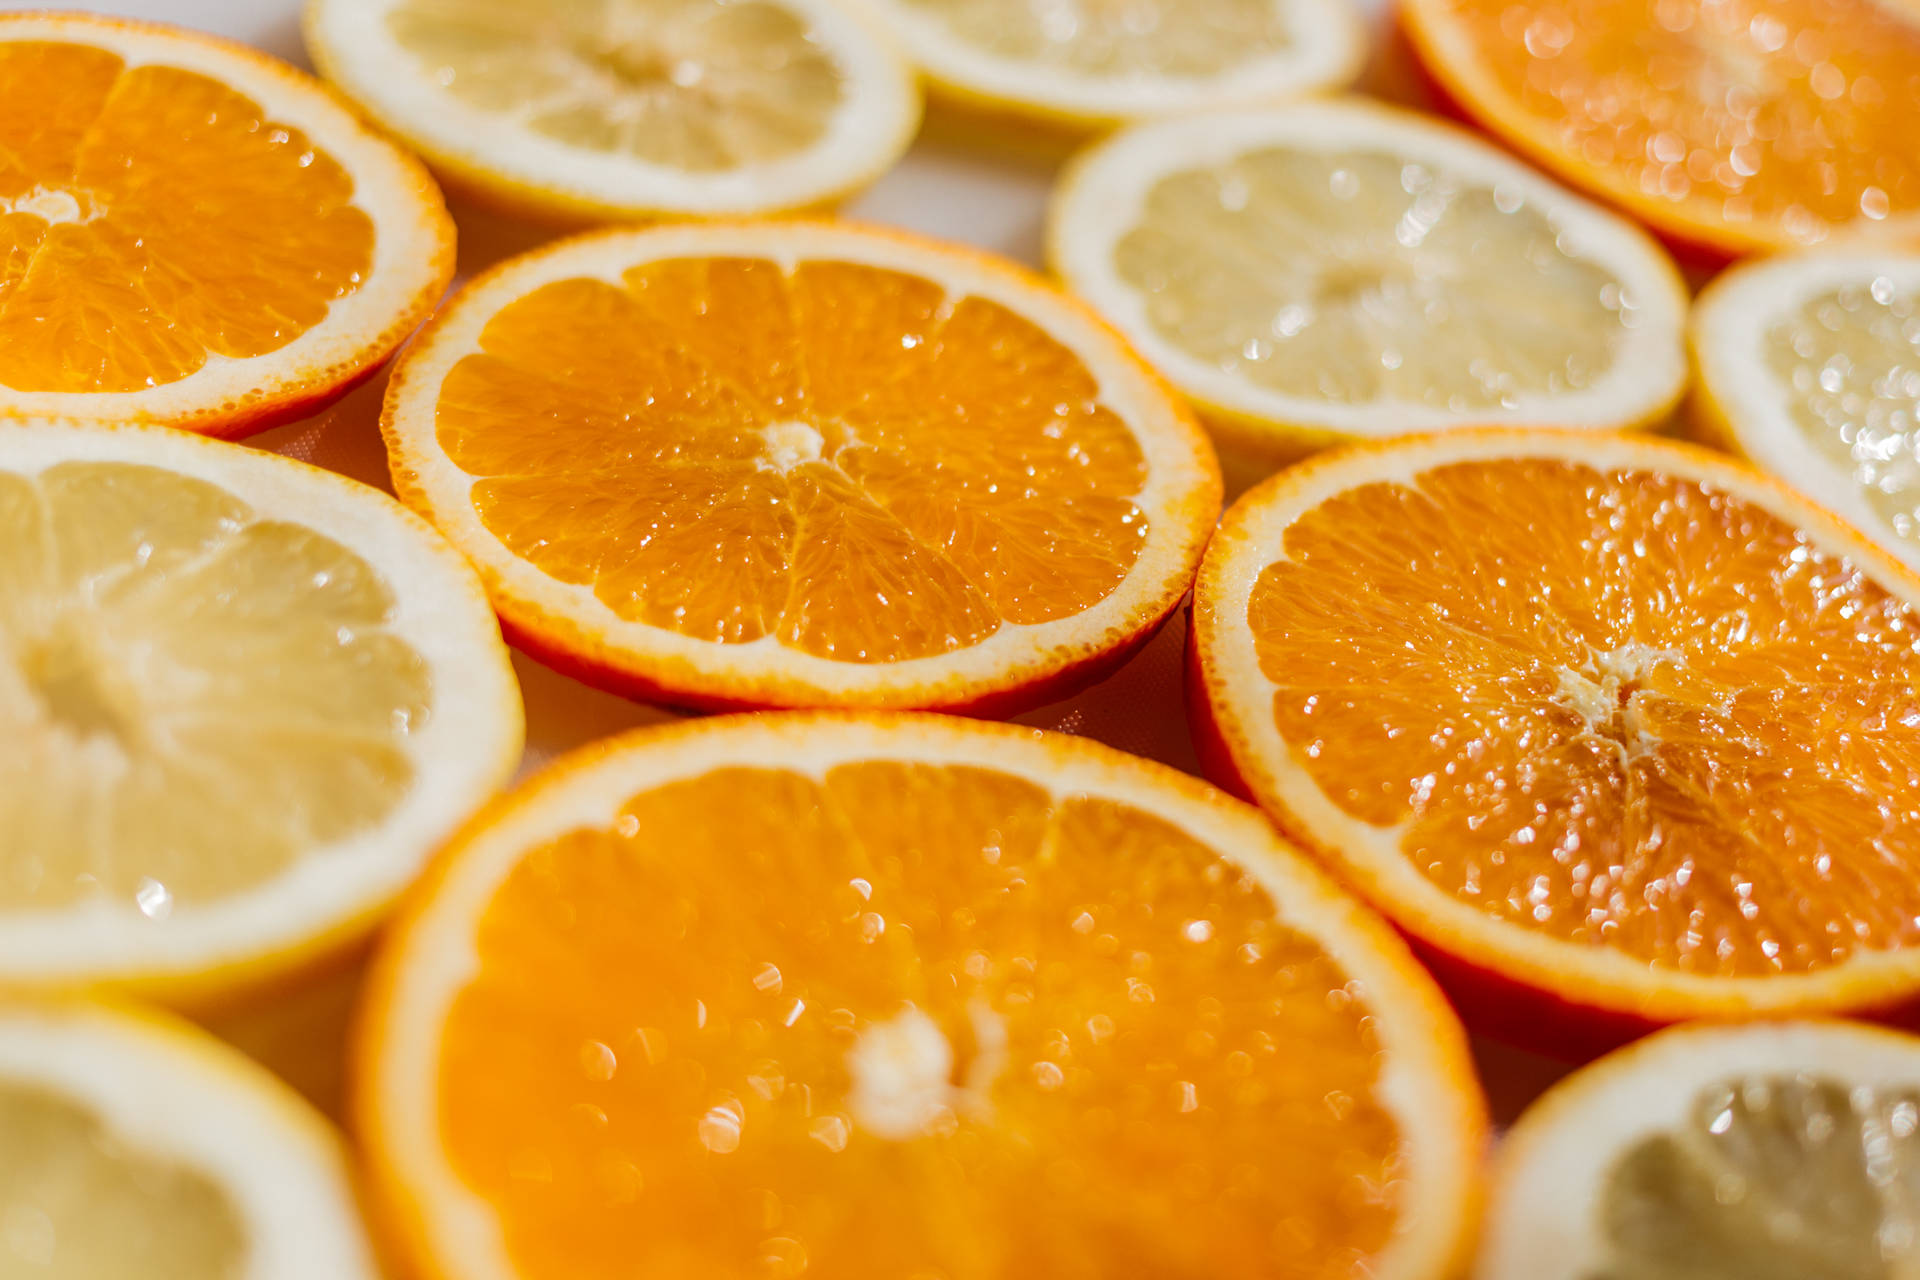 Enjoy The Sweet And Sour Delight Of Orange And Lemon Slices! Background